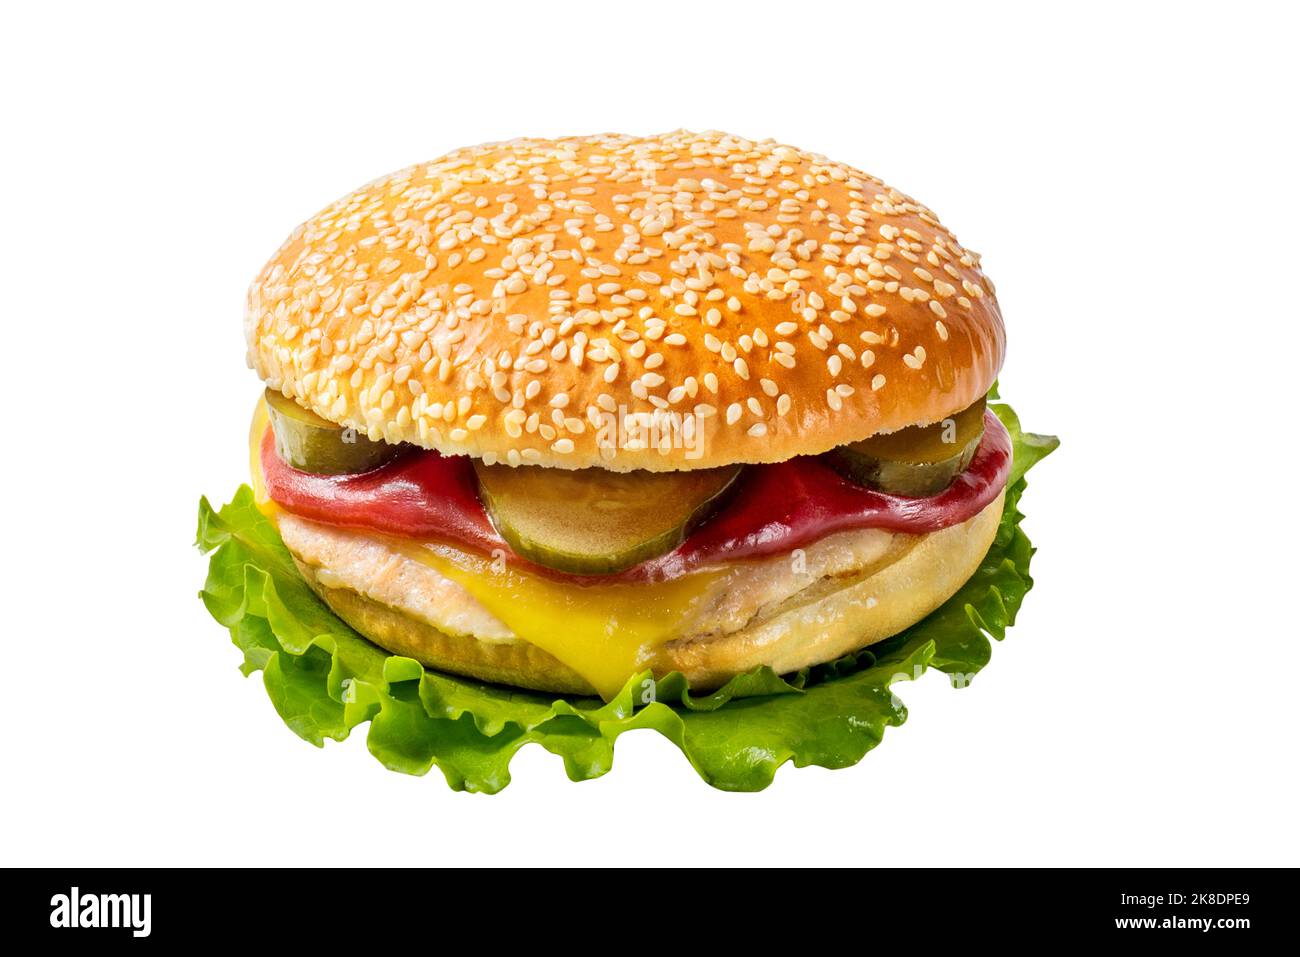 Grilled cheeseburger with pickles and sauces in a white bun with sesame seeds on a lettuce leaf. Street food Stock Photo